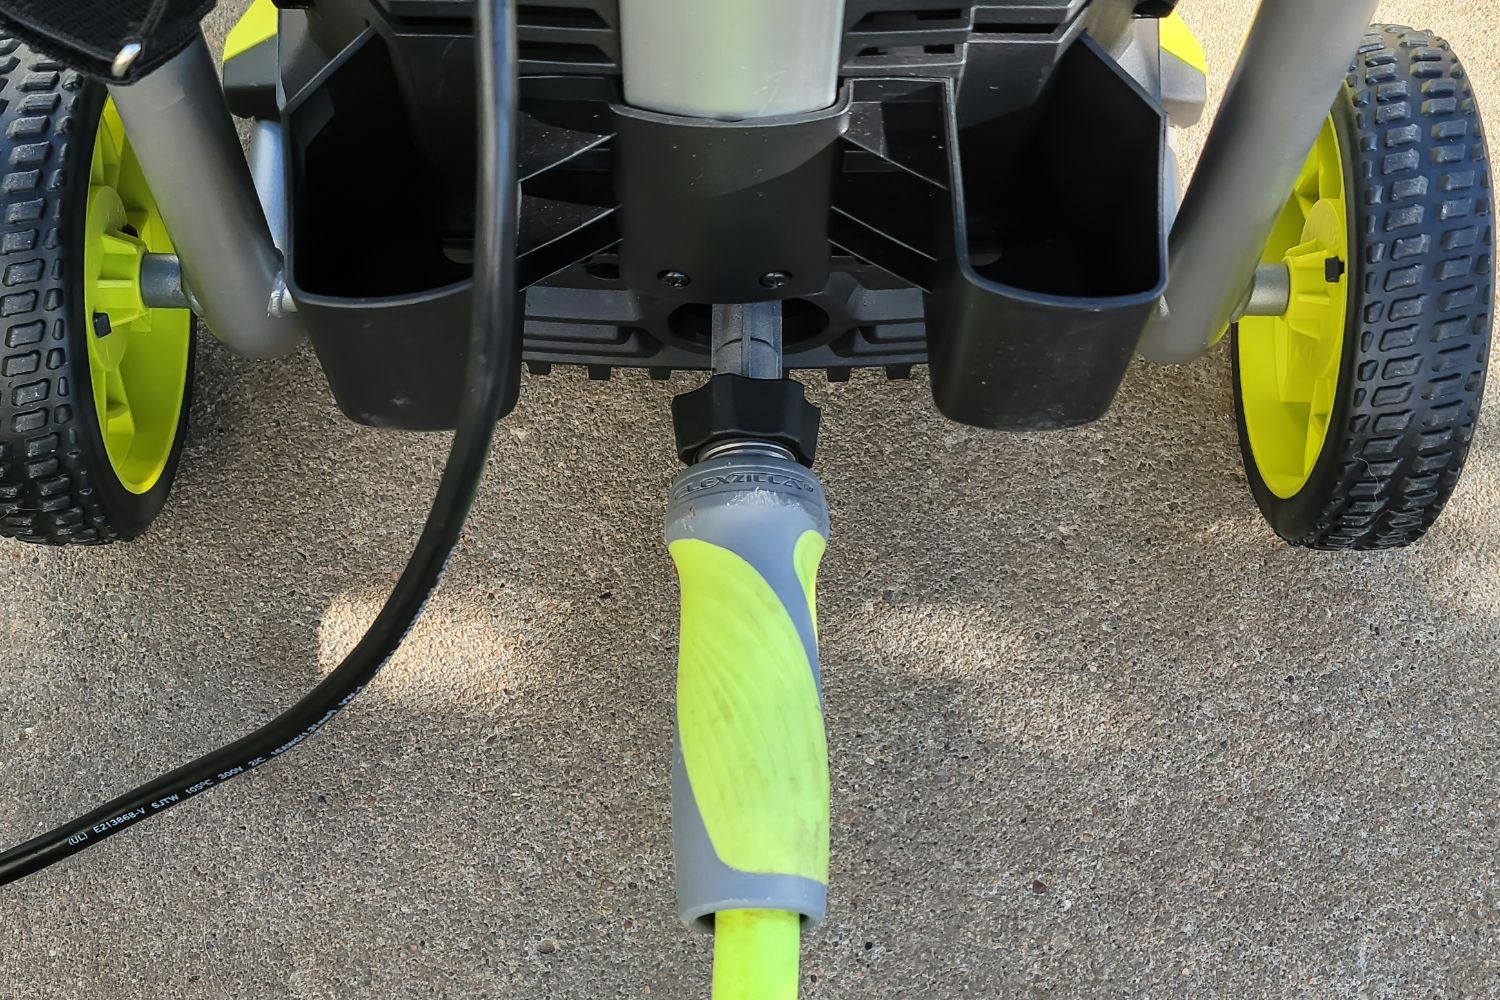 A close-up of the hose attachment of the Ryobi pressure washer 2000 PSI